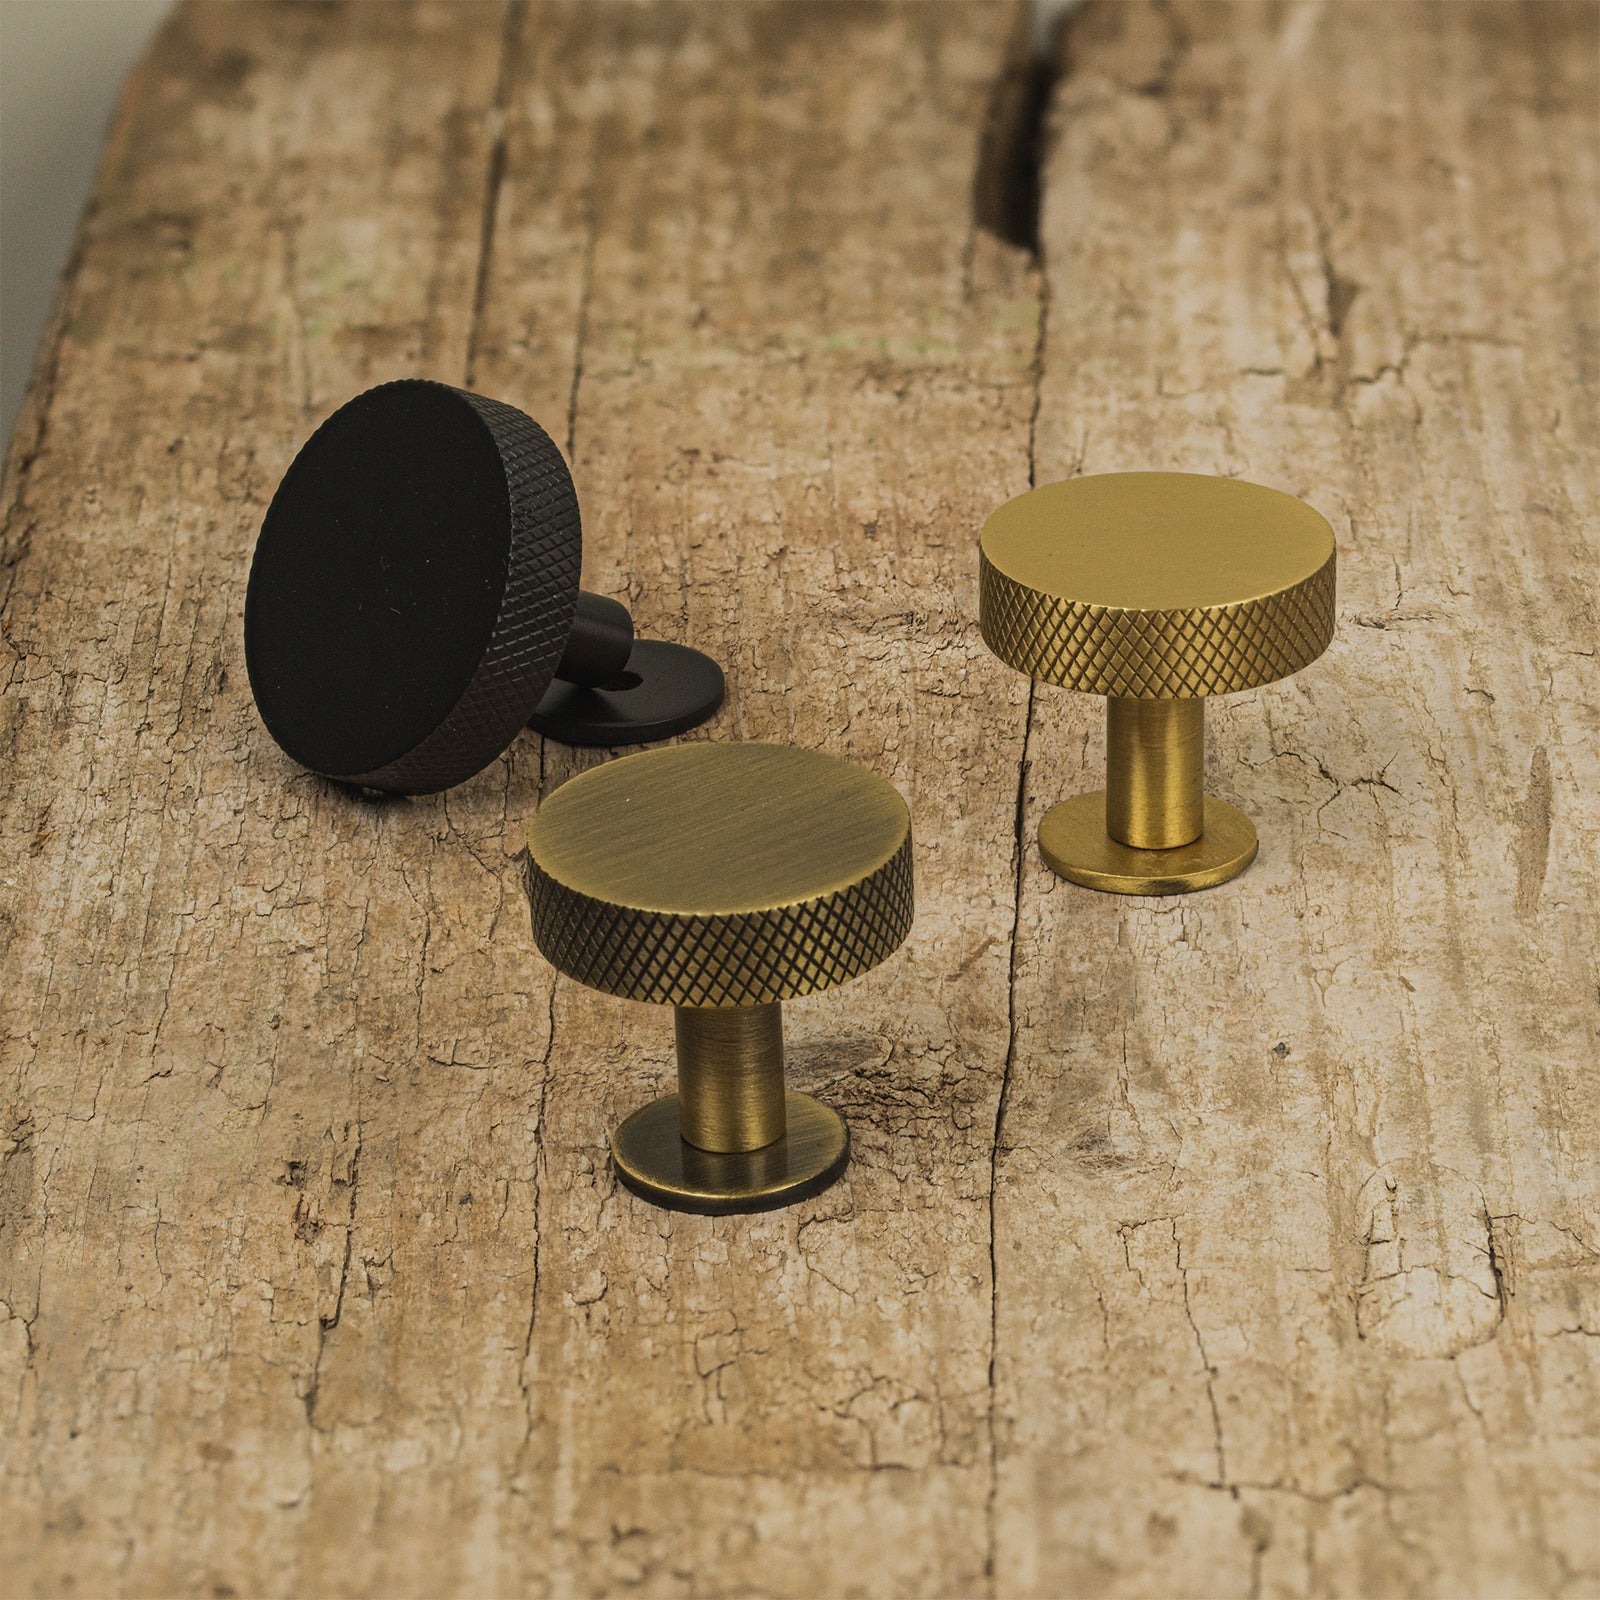 Disc Knurled Cabinet Knobs on Rose, kitchen cupboard knobs SHOW